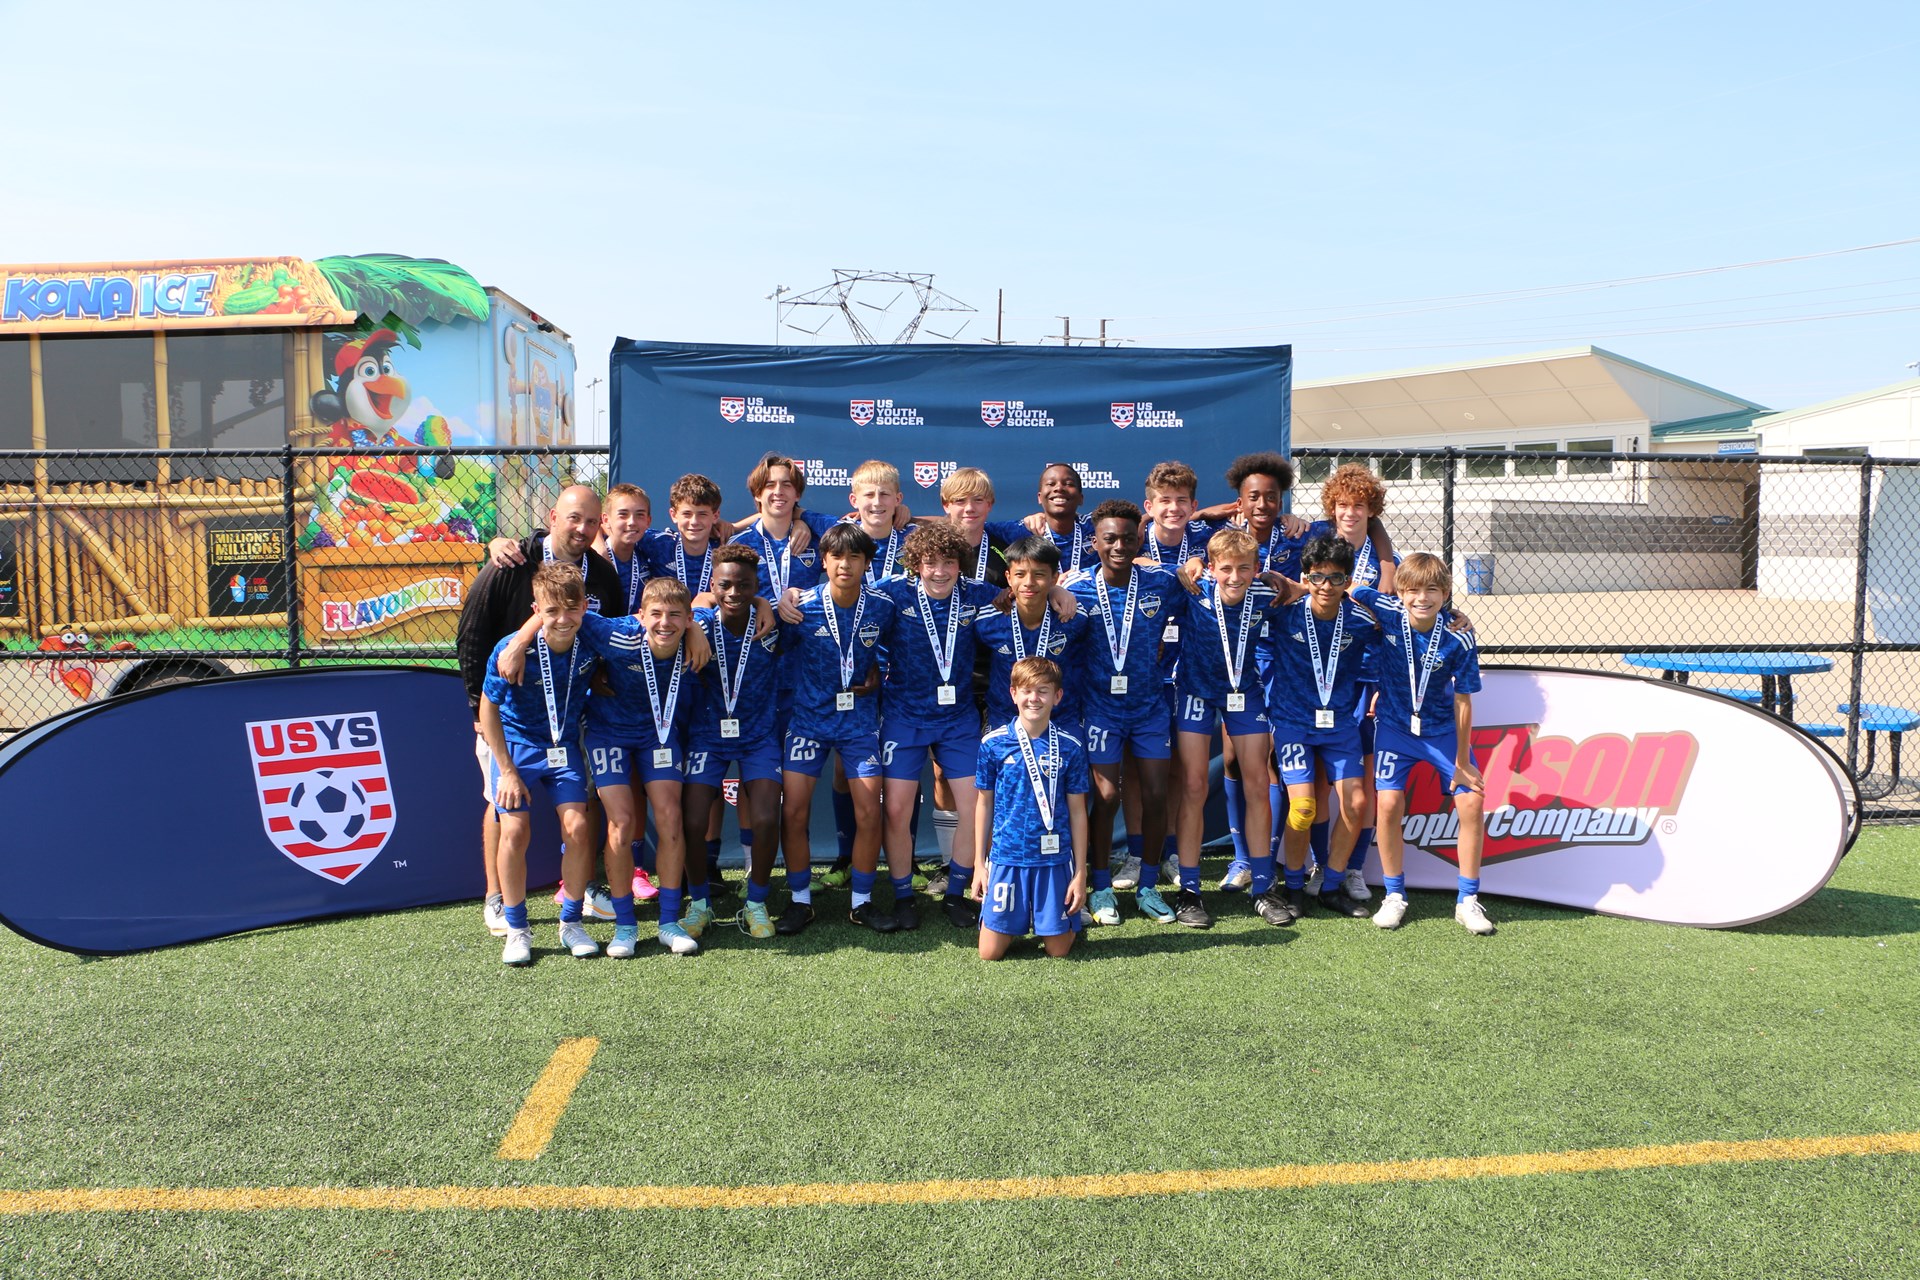 Three Herndon Teams Win League Championship to Advance to USYS Regionals;  Two Teams Still in the Hunt with State Cup Championship June 5-6